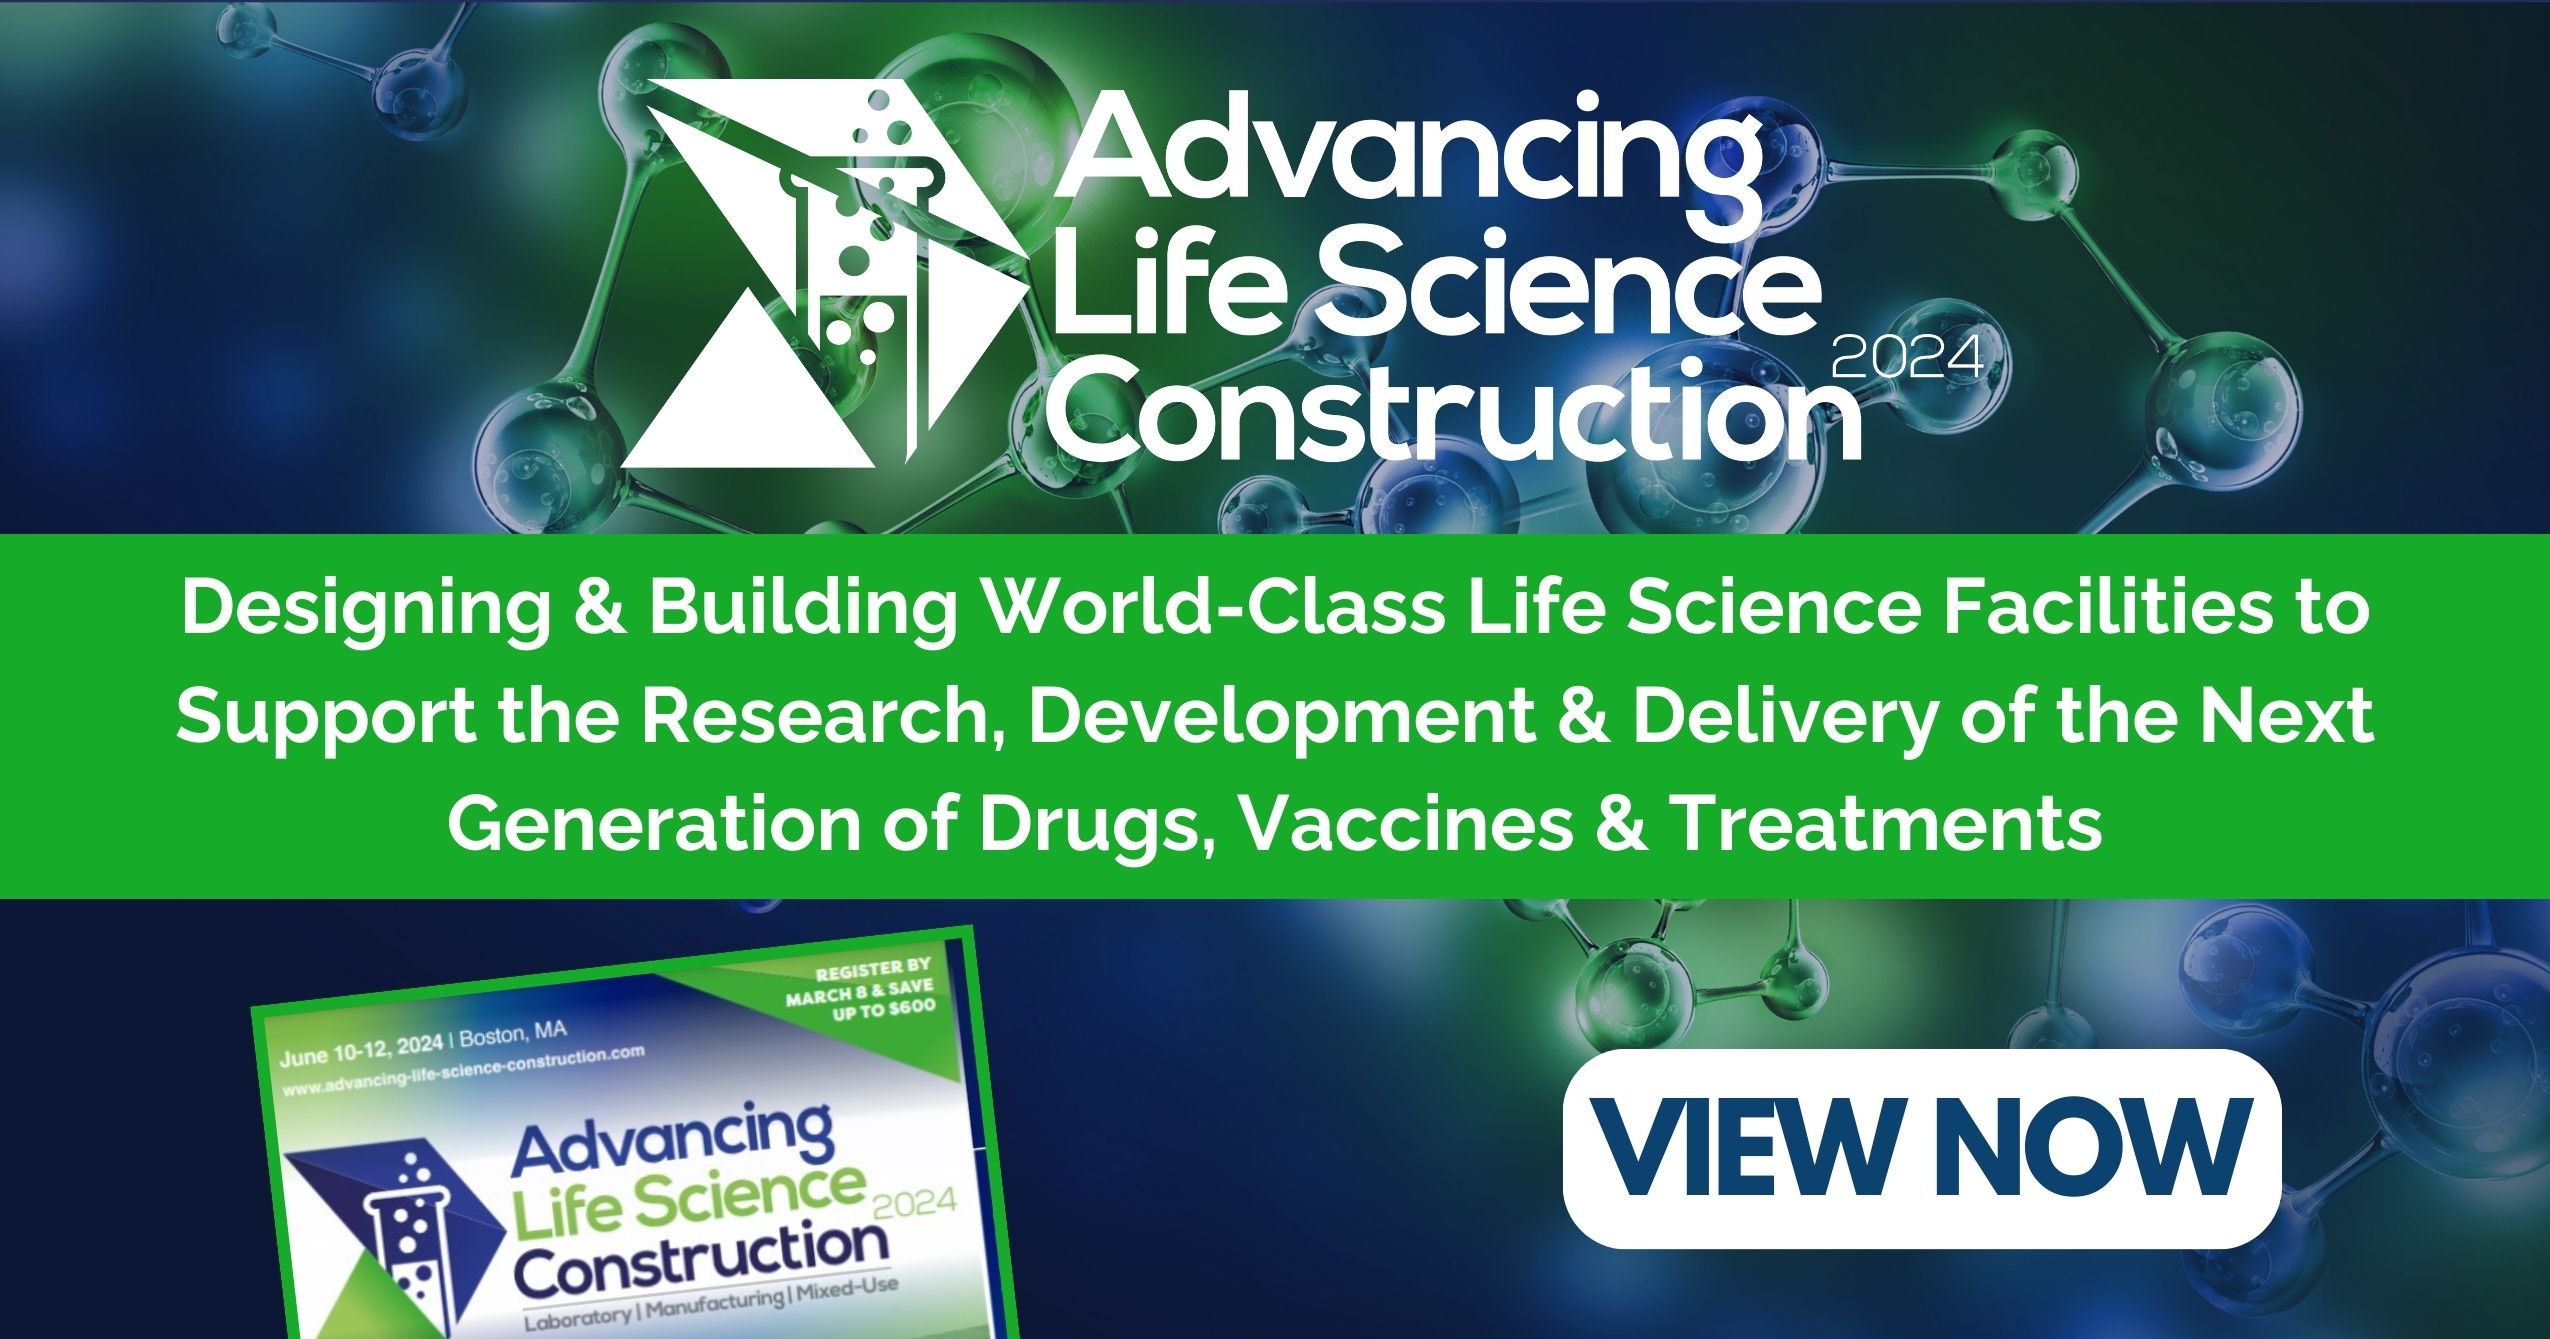 Full 2024 Event Guide Advancing Life Science Construction